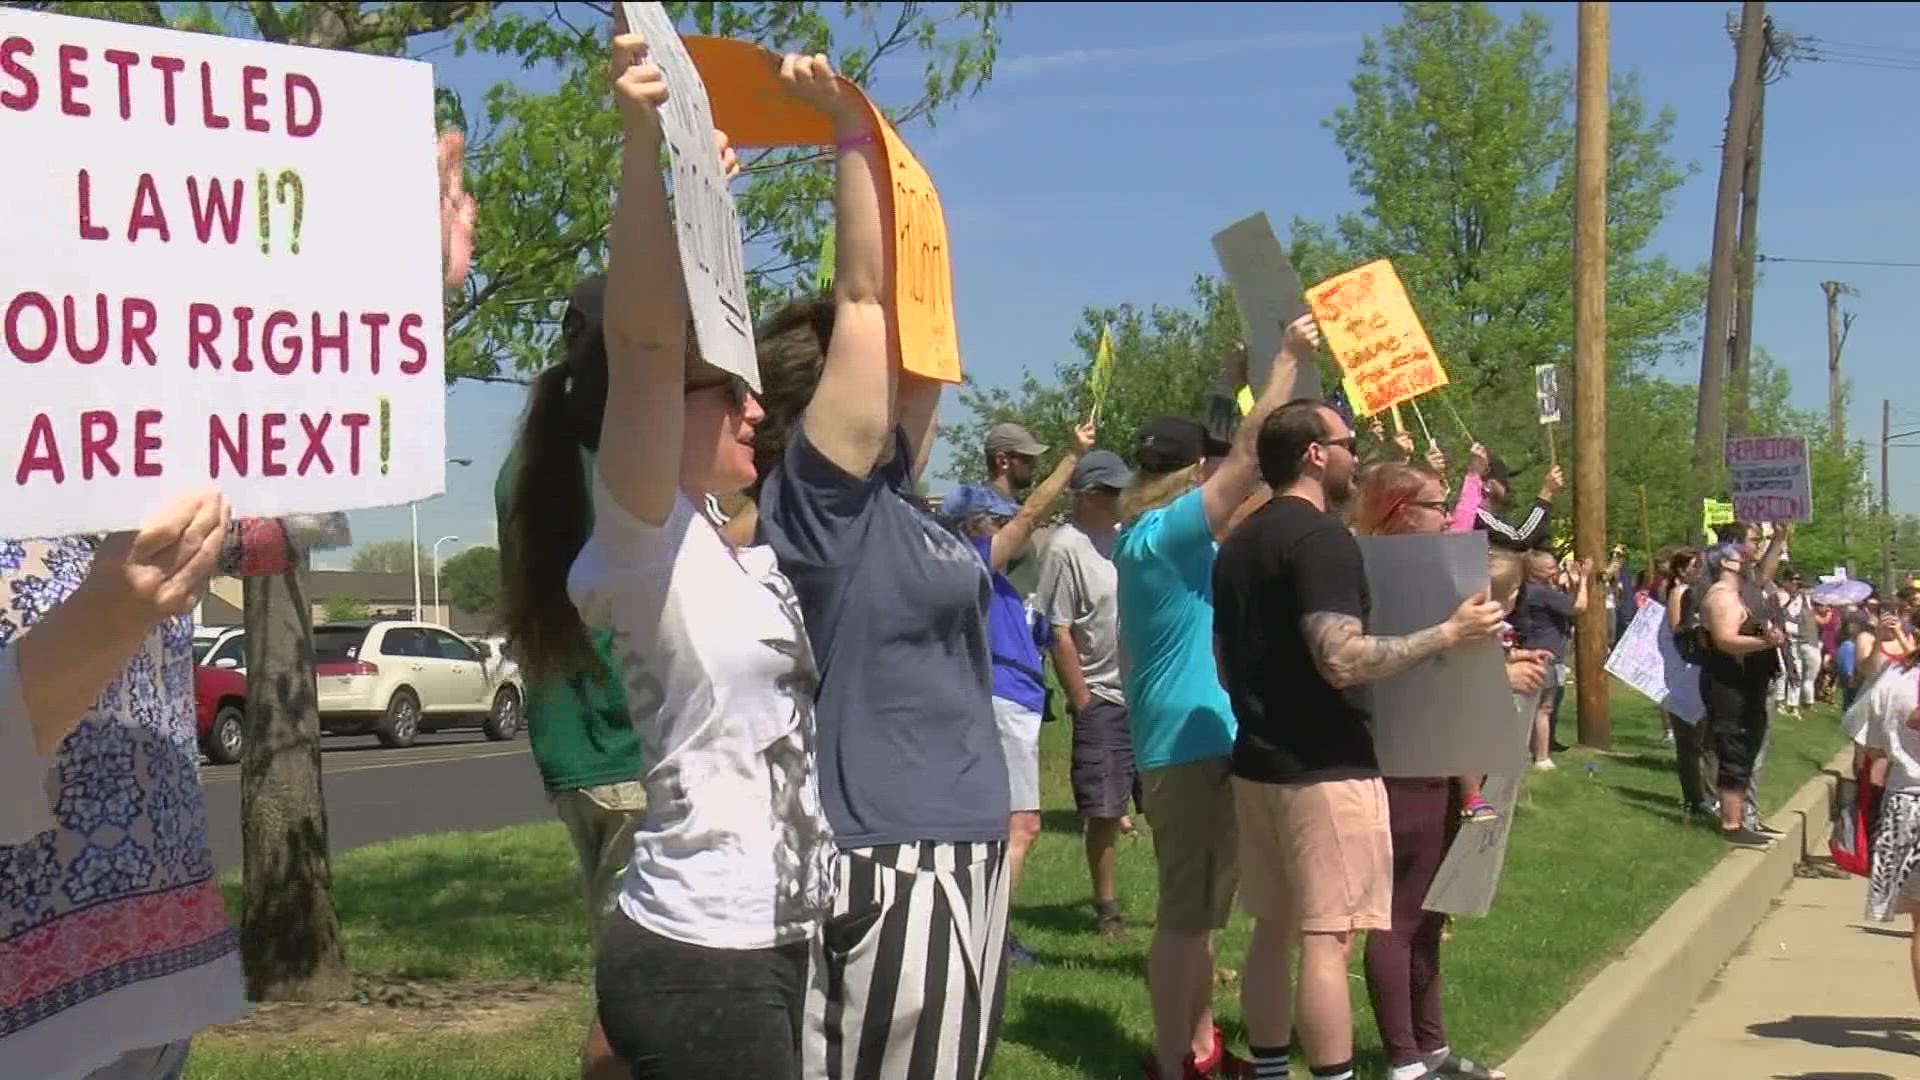 Protesters across the nation - and right in Toledo - voiced outrage Saturday over the possibility of the Supreme Court overturning women's right to an abortion.